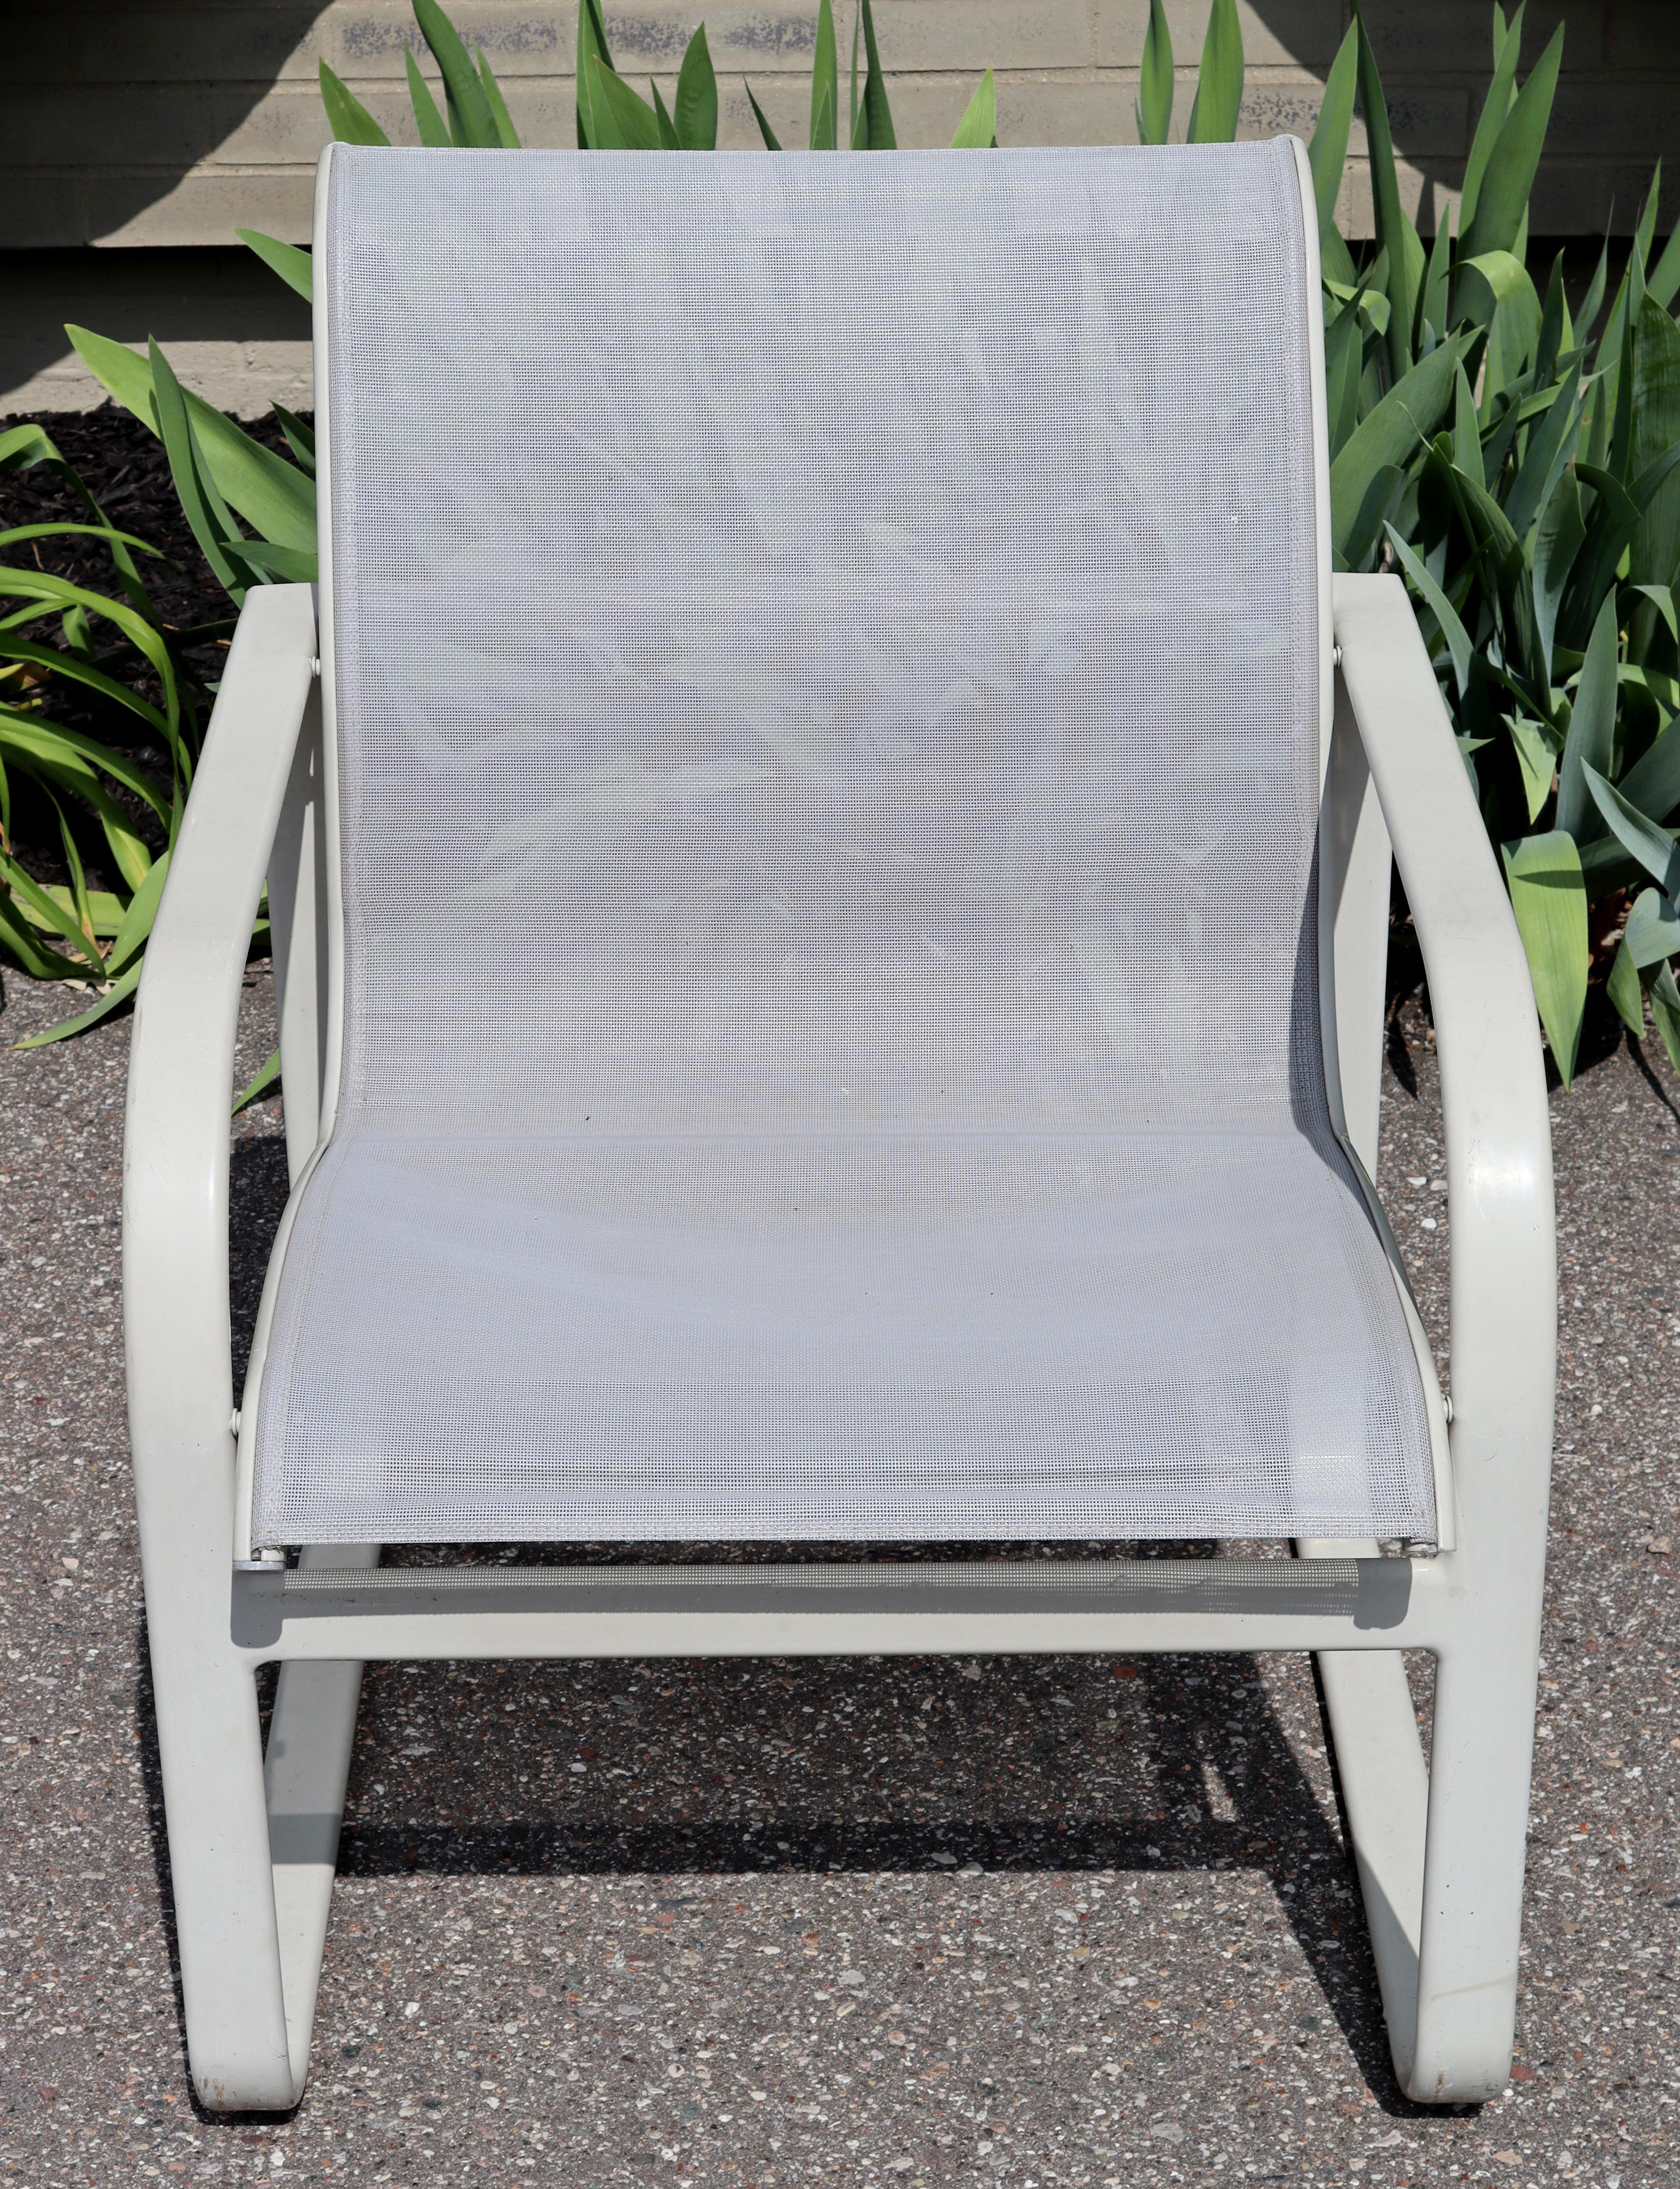 For your consideration is a superb, outdoor patio set of eight armchairs, made of Off white painted metal and with light gray mesh backs and seats, by Brown Jordan, circa the 1970s. In very good vintage condition. The dimensions are 24.5